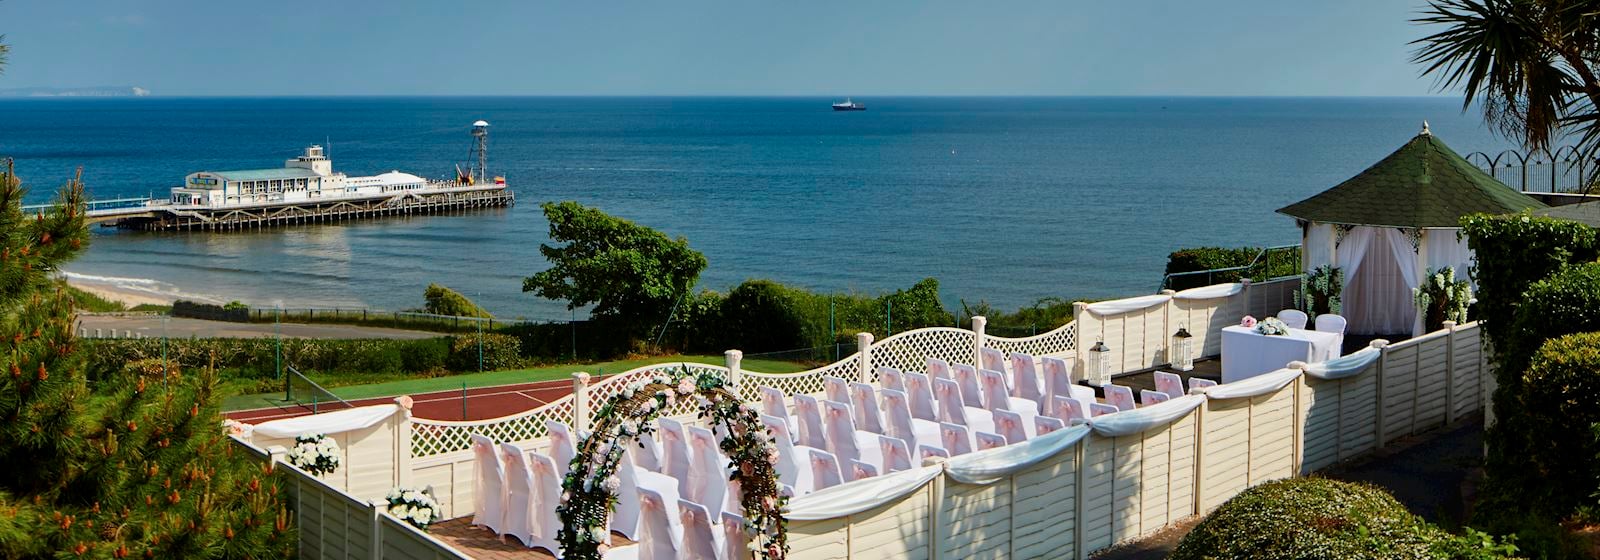 Wedding Party Venues Bournemouth